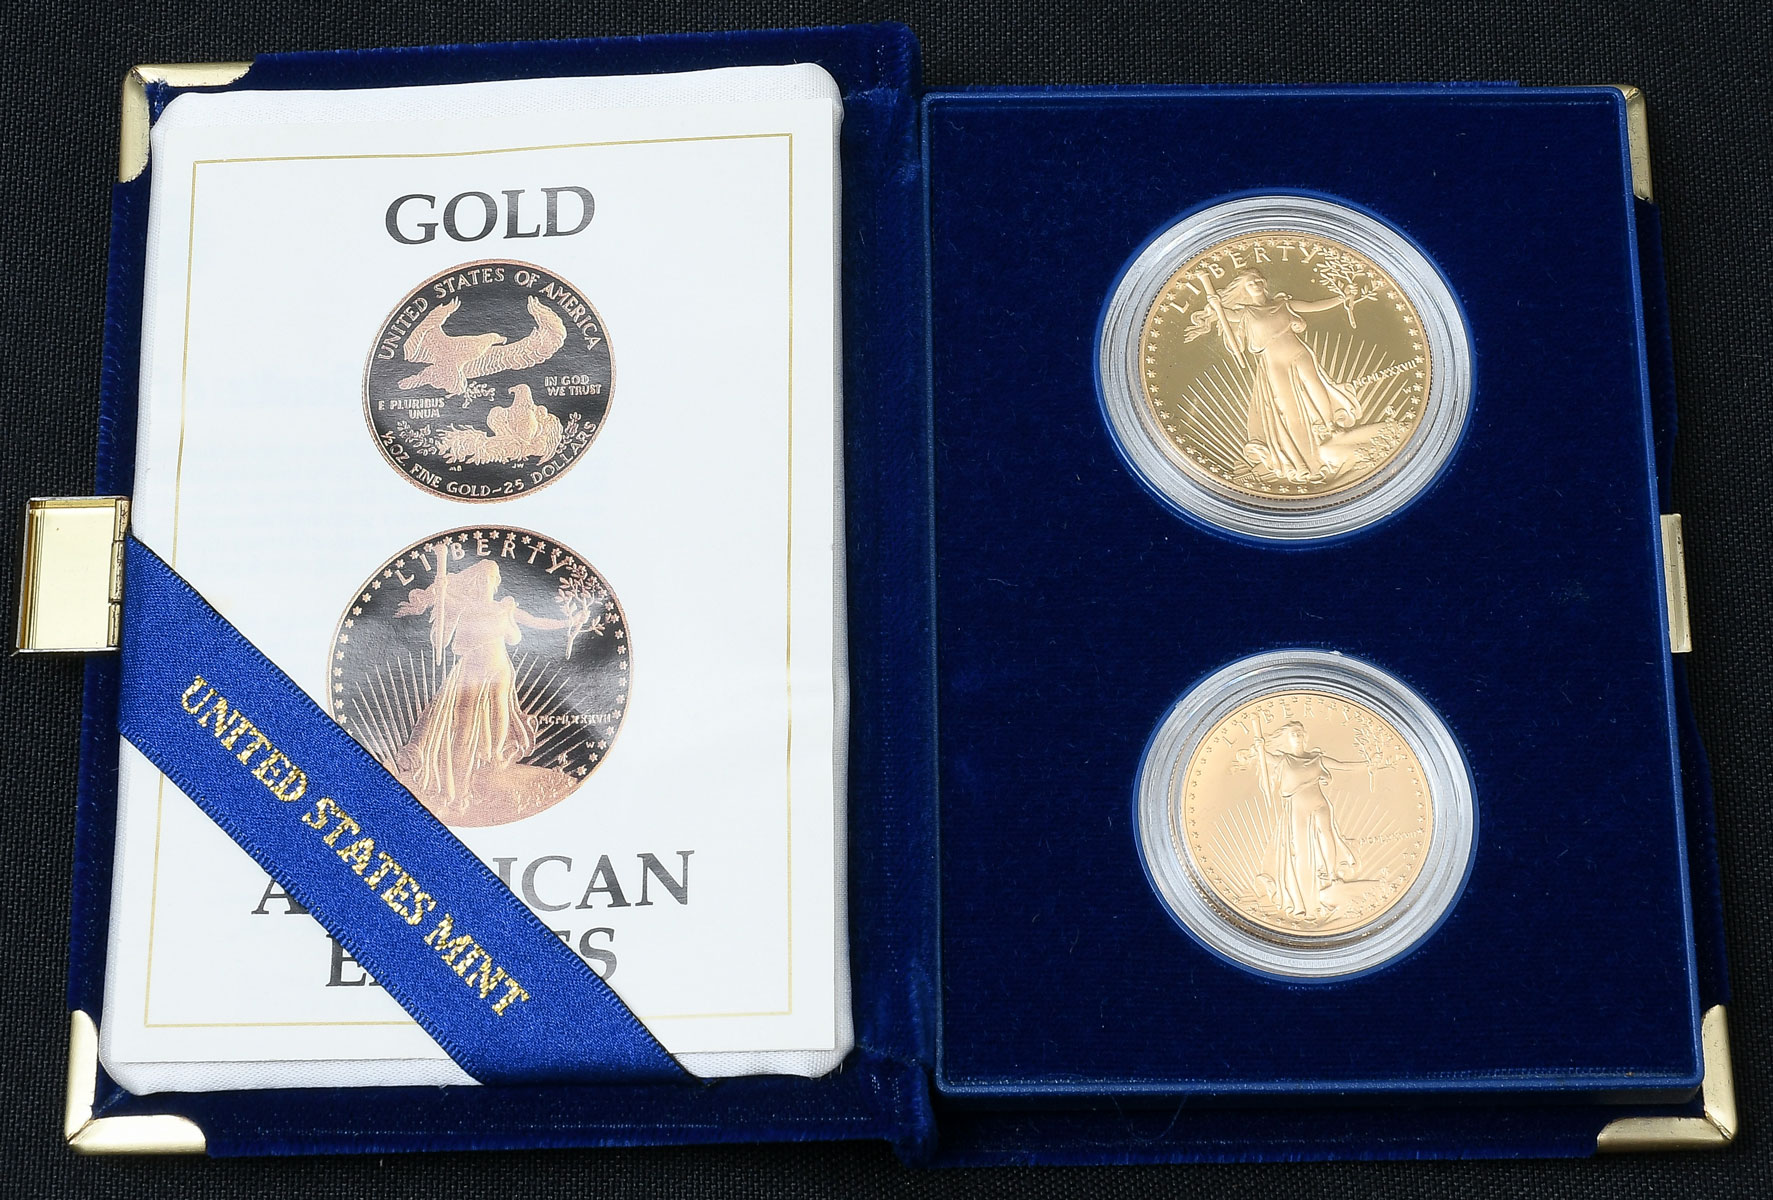 1987 AMERICAN EAGLE PROOF GOLD